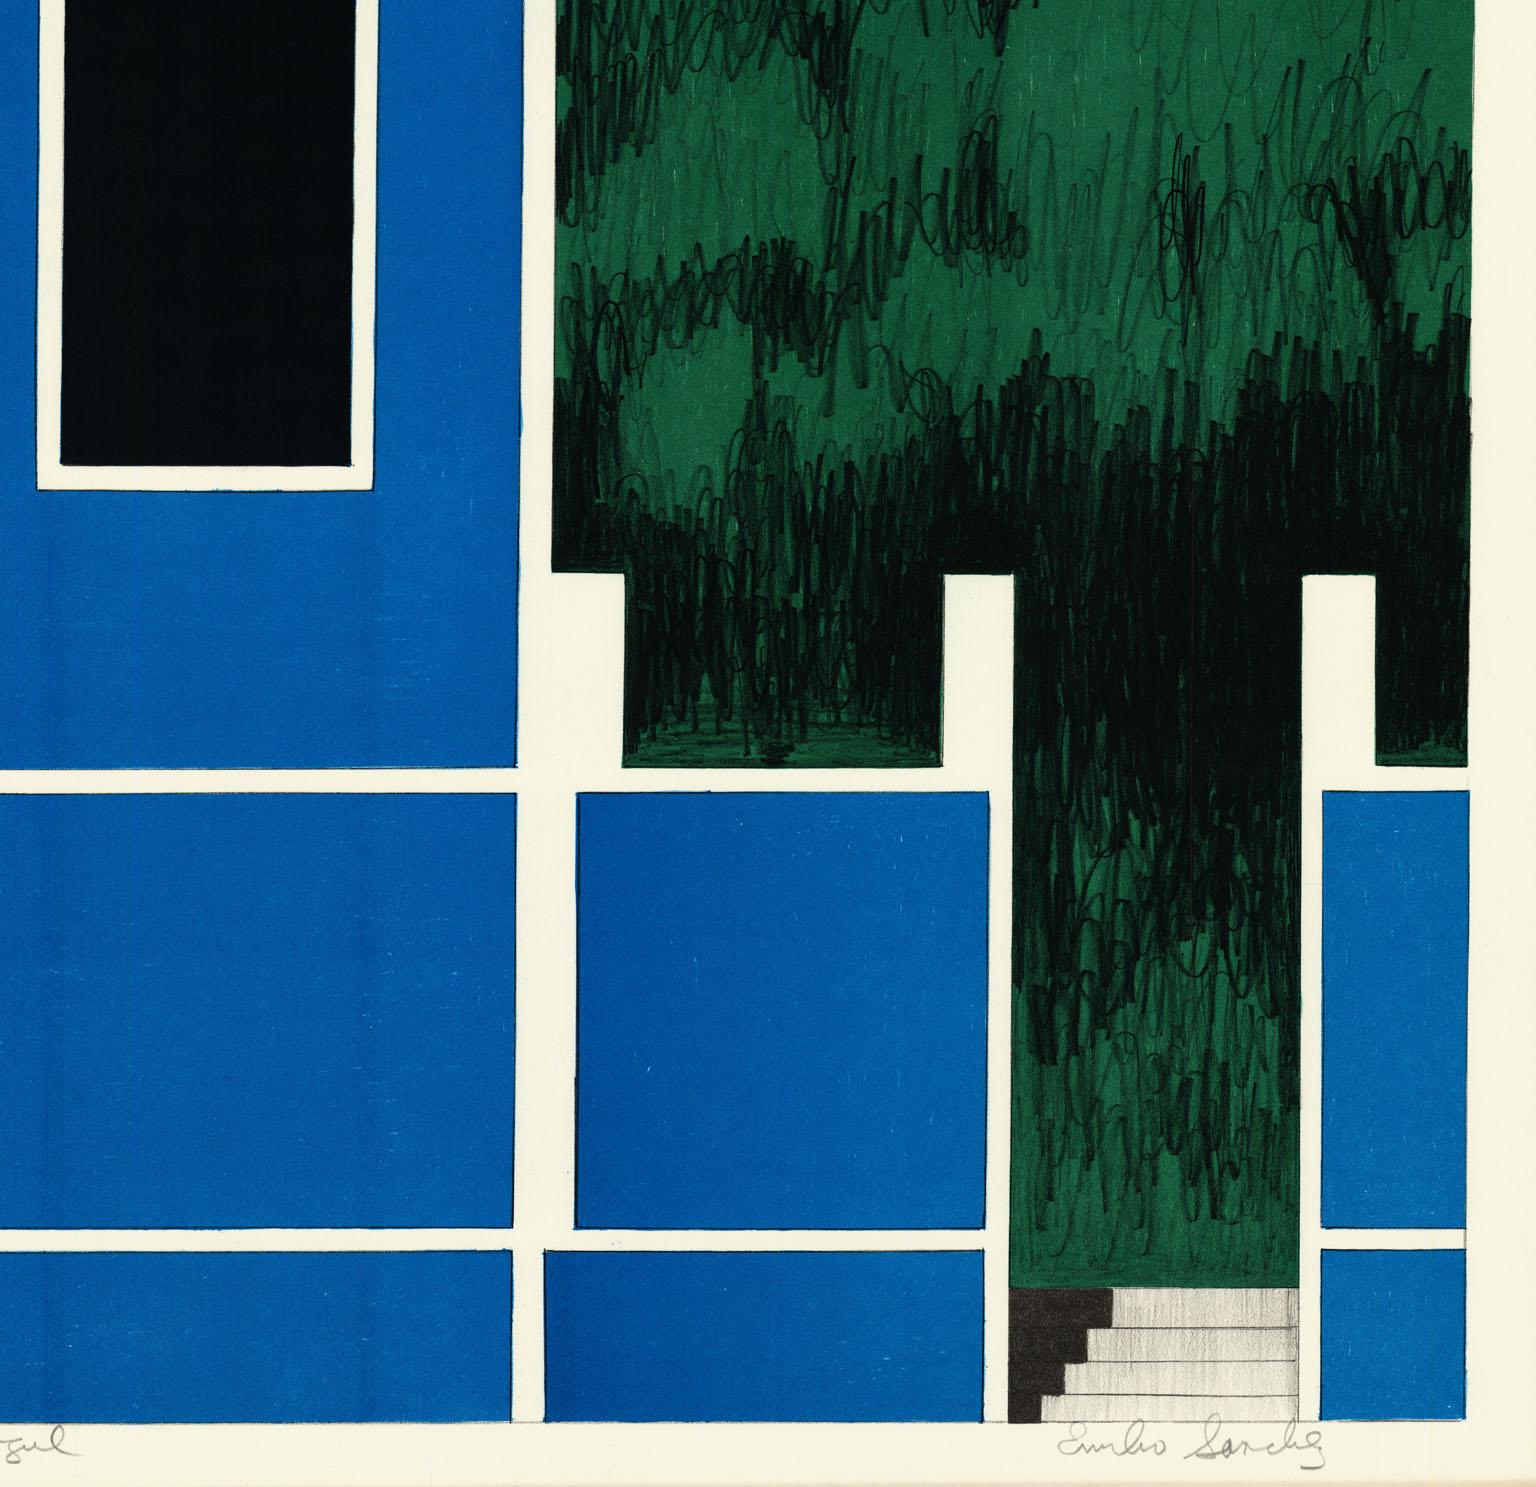 “LA CASITA AZUL”

Emilio Sanchez (1921-1999) created this color lithograph entitled “La Casita Azul” circa 1970.  The image size is 21.50 x 31.25 inches and the paper size 23.13 x 33 inches.  Printed in an edition of 100 this impression is inscribed